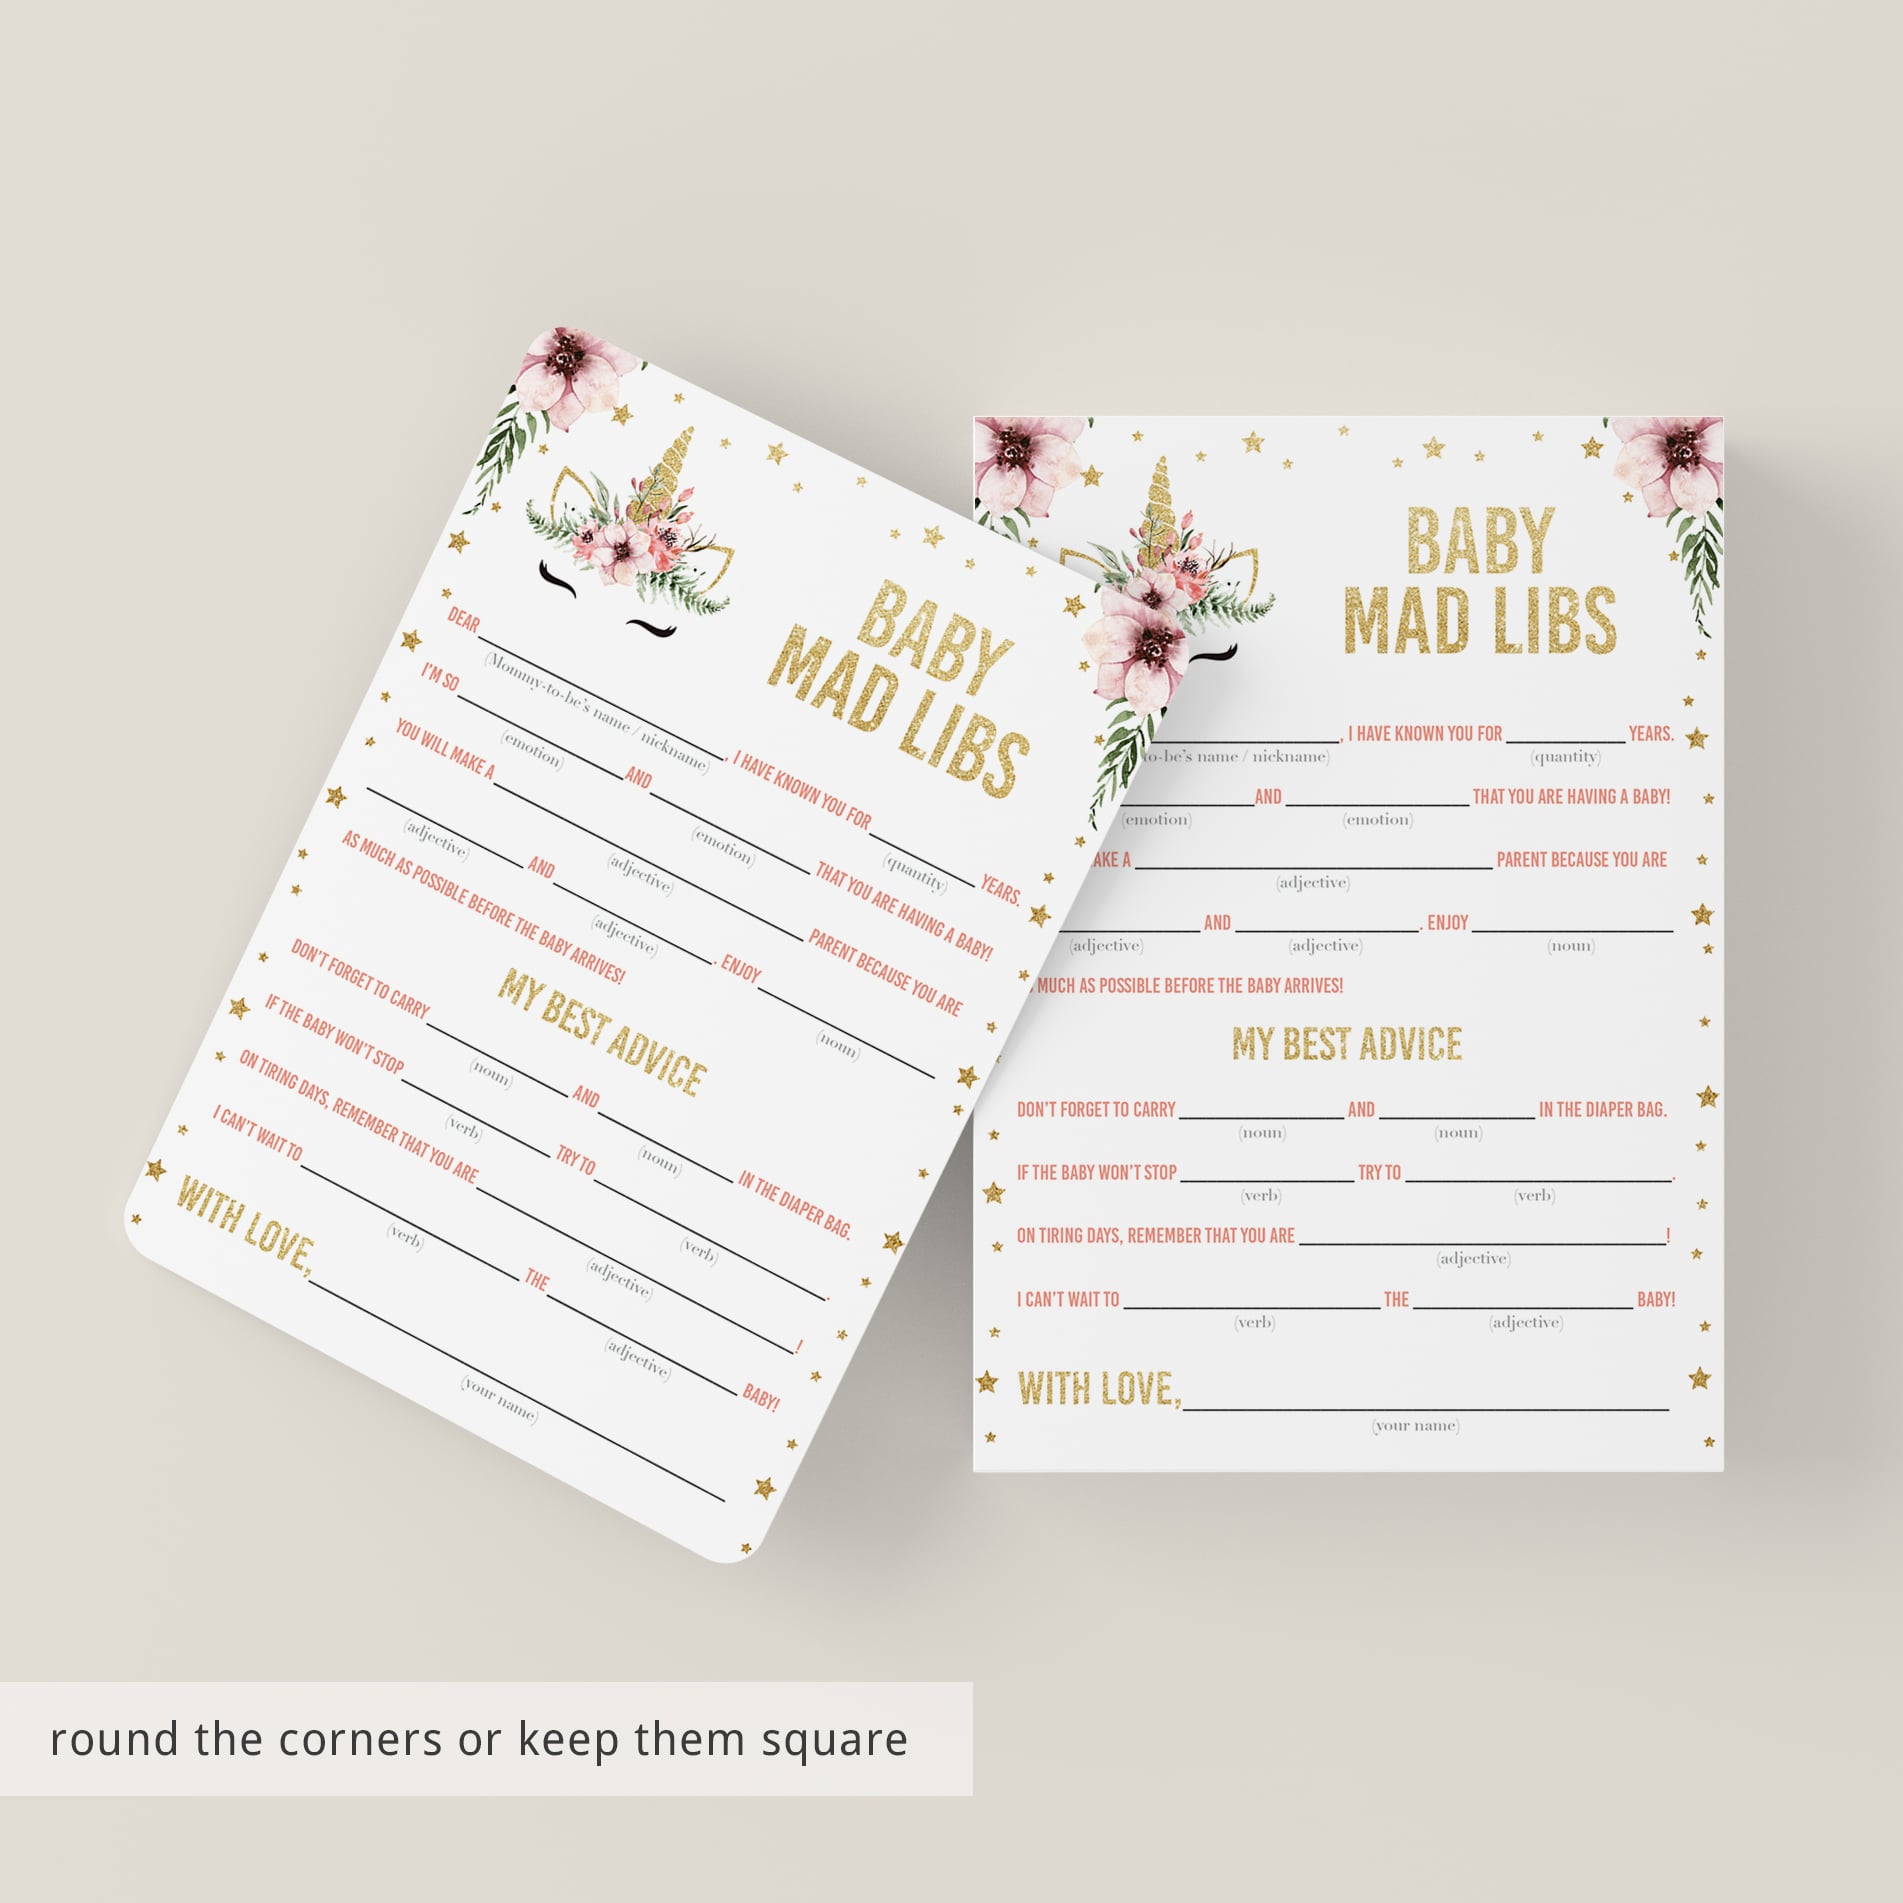 Baby shower mad libs printable game cards pink and gold by LittleSizzle